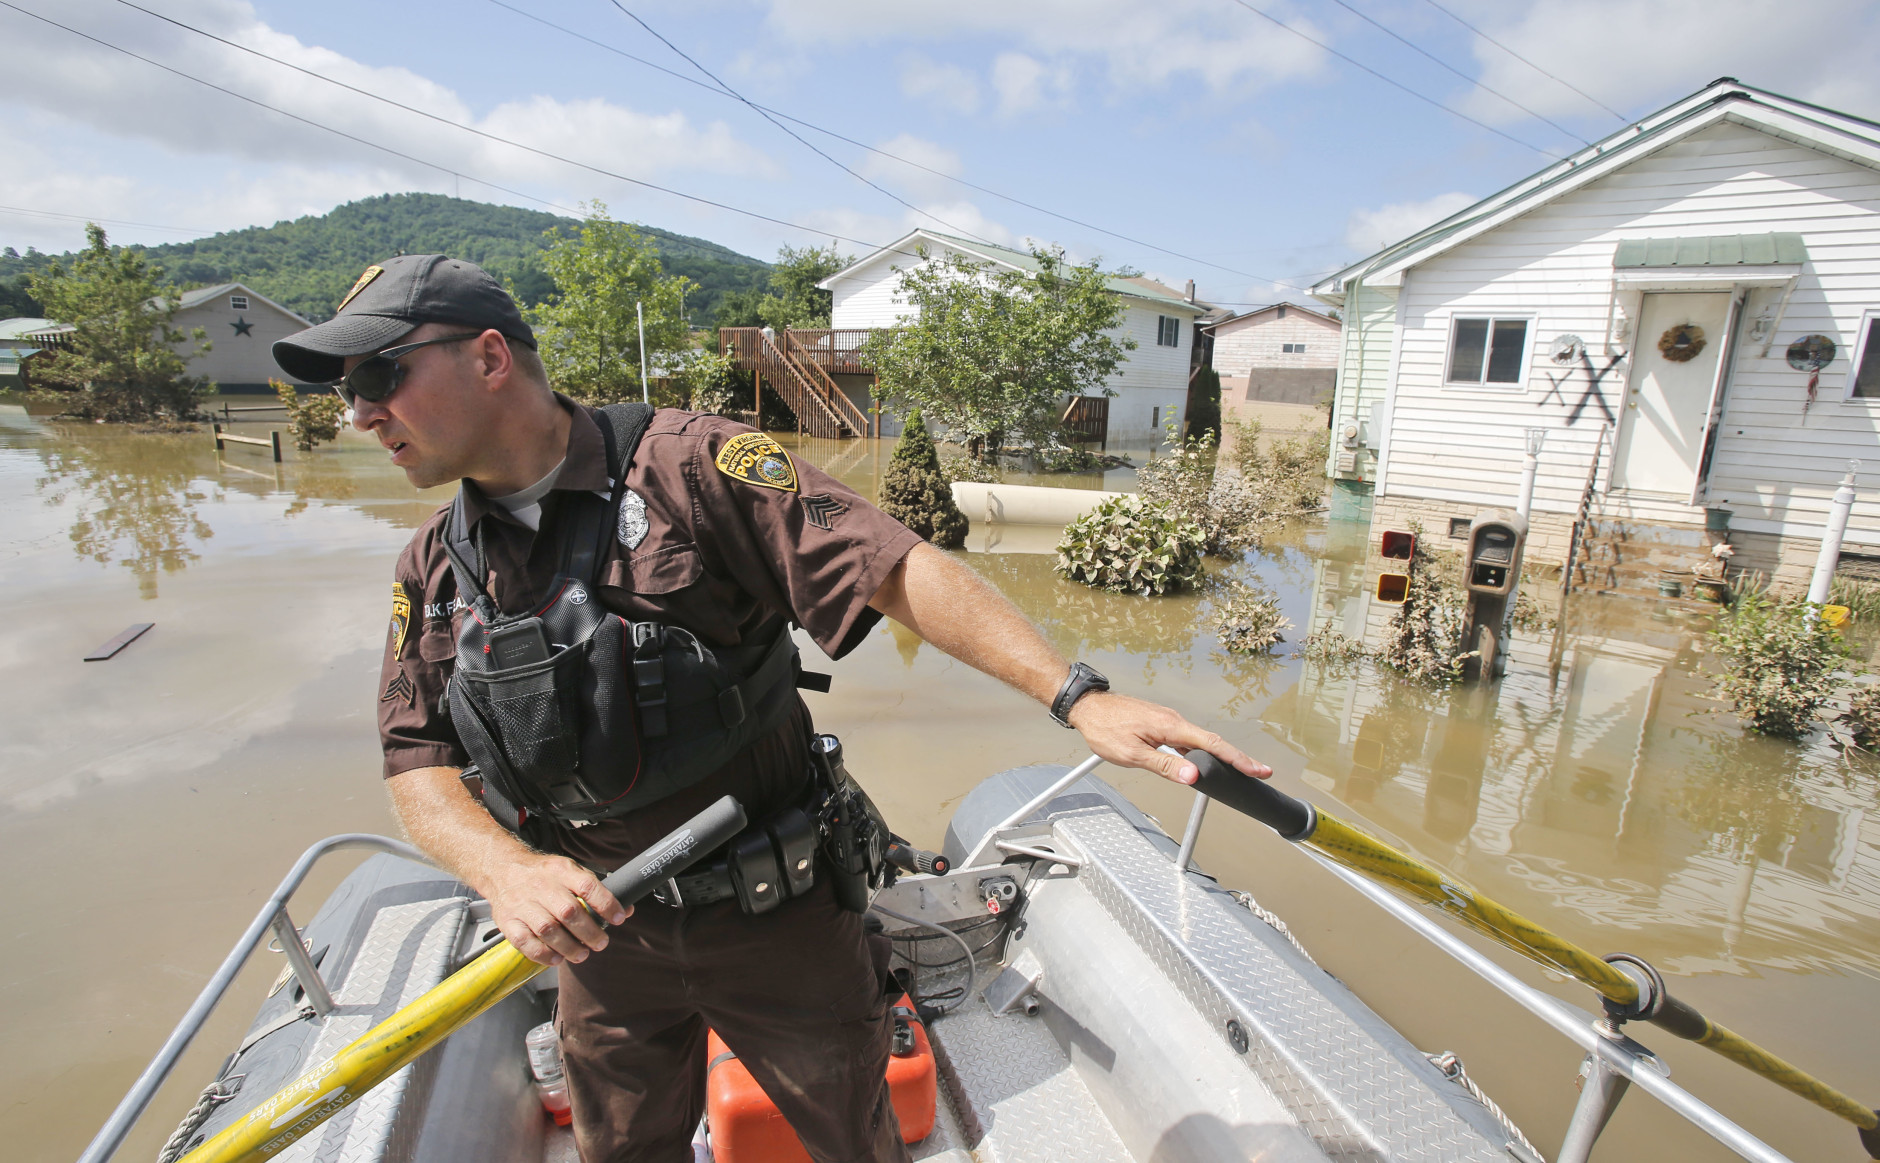 Lt. Dennis Feazell, of the West Virginia Department of Natural Resources, watches for debris as he and a co-worker search flooded homes in Rainelle, W. Va., Saturday, June 25, 2016. Heavy rains that pummeled West Virginia left multiple people dead, and authorities said Saturday that an unknown number of people in the hardest-hit county remained unaccounted for.  (AP Photo/Steve Helber)